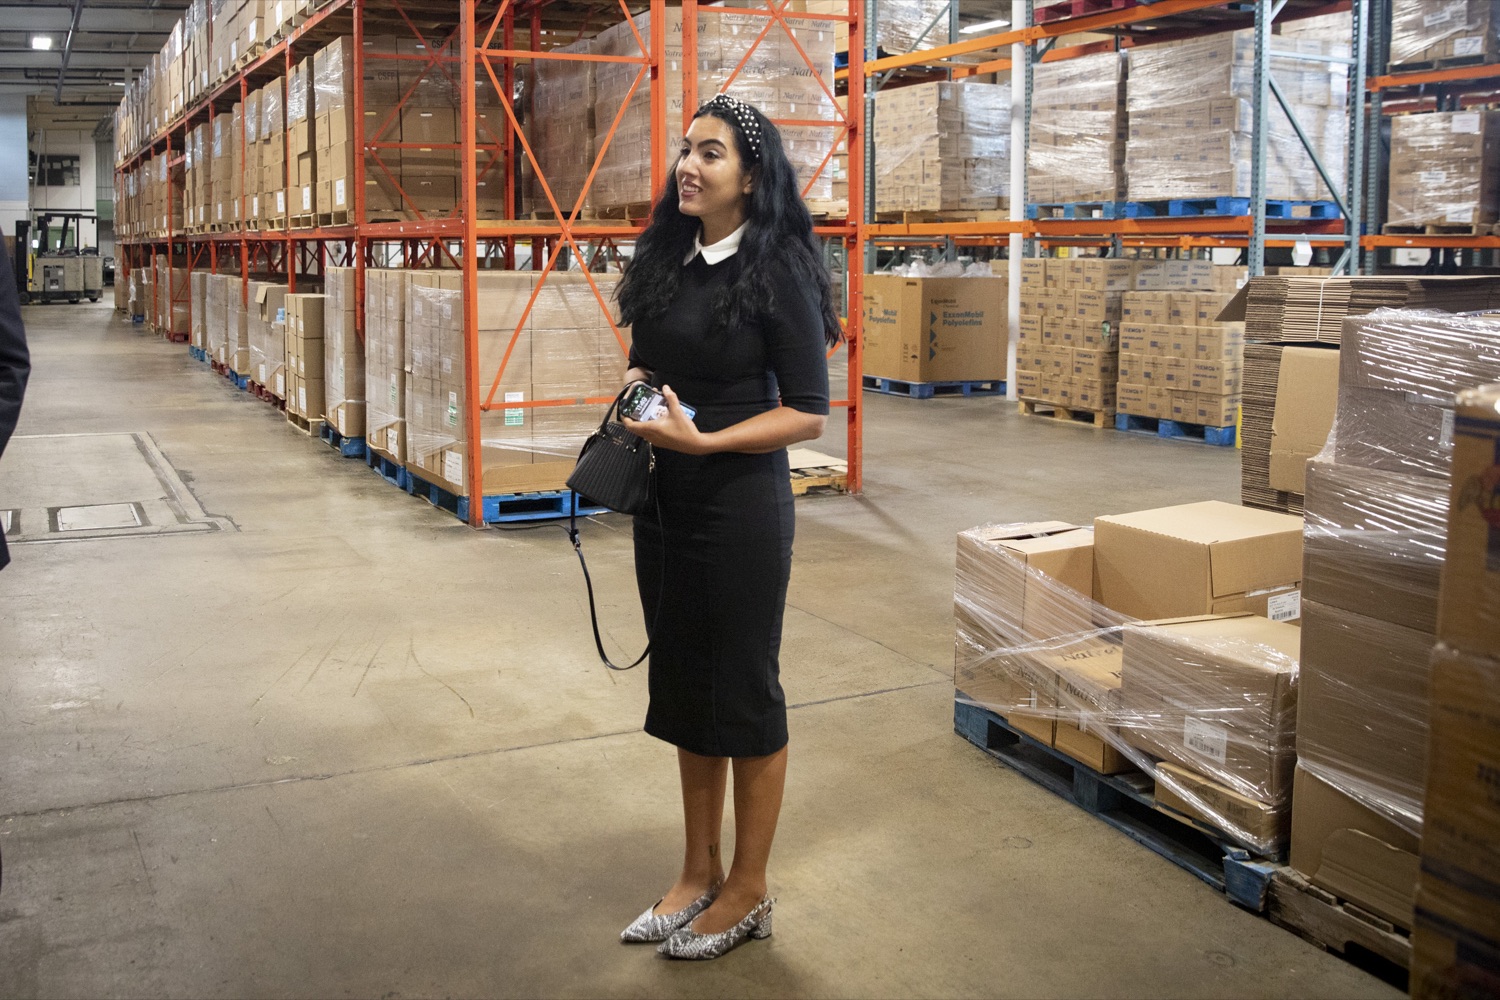 Second Lady of Pennsylvania Gisele Fetterman tours the Westmoreland Food Bank, in Delmont, PA on September 23, 2021.<br><a href="https://filesource.amperwave.net/commonwealthofpa/photo/19091_ag_doordash_cz_10.jpg" target="_blank">⇣ Download Photo</a>